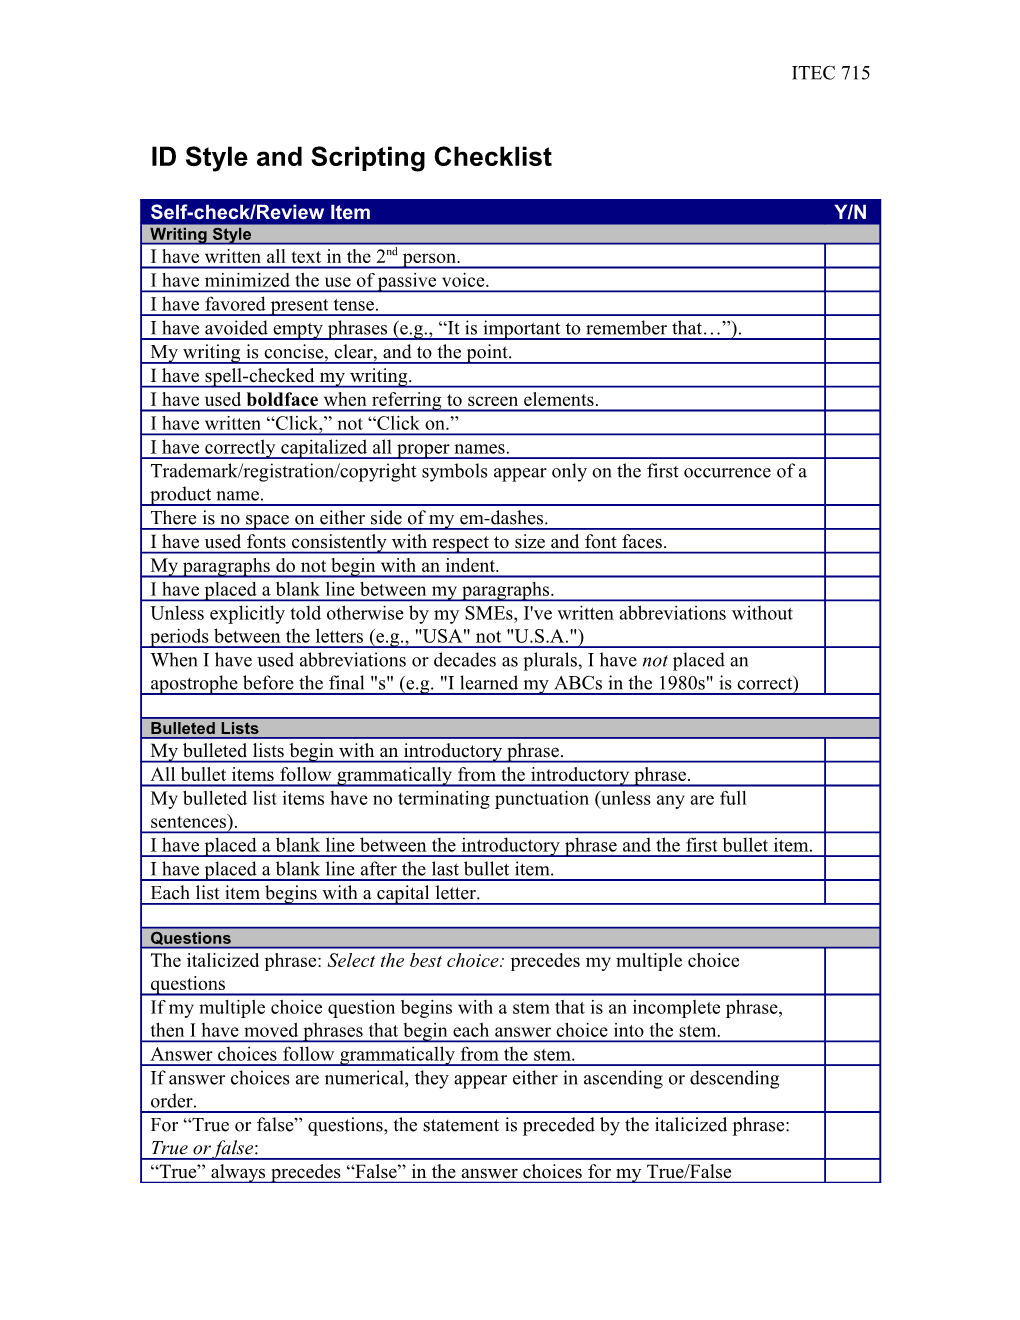 ID Style and Scripting Checklist